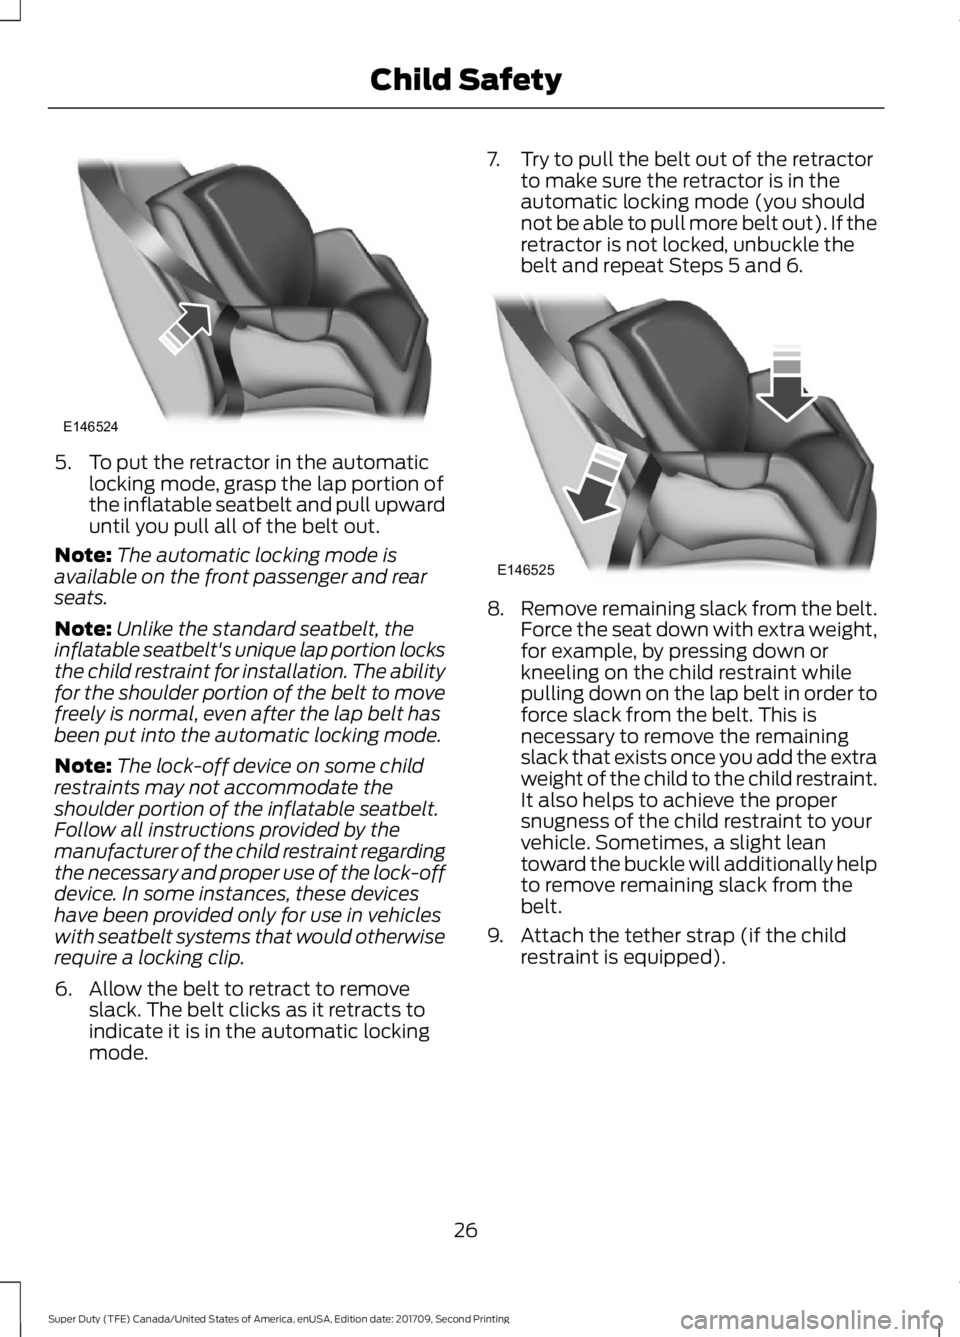 FORD F-350 2018  Owners Manual 5. To put the retractor in the automatic
locking mode, grasp the lap portion of
the inflatable seatbelt and pull upward
until you pull all of the belt out.
Note: The automatic locking mode is
availabl